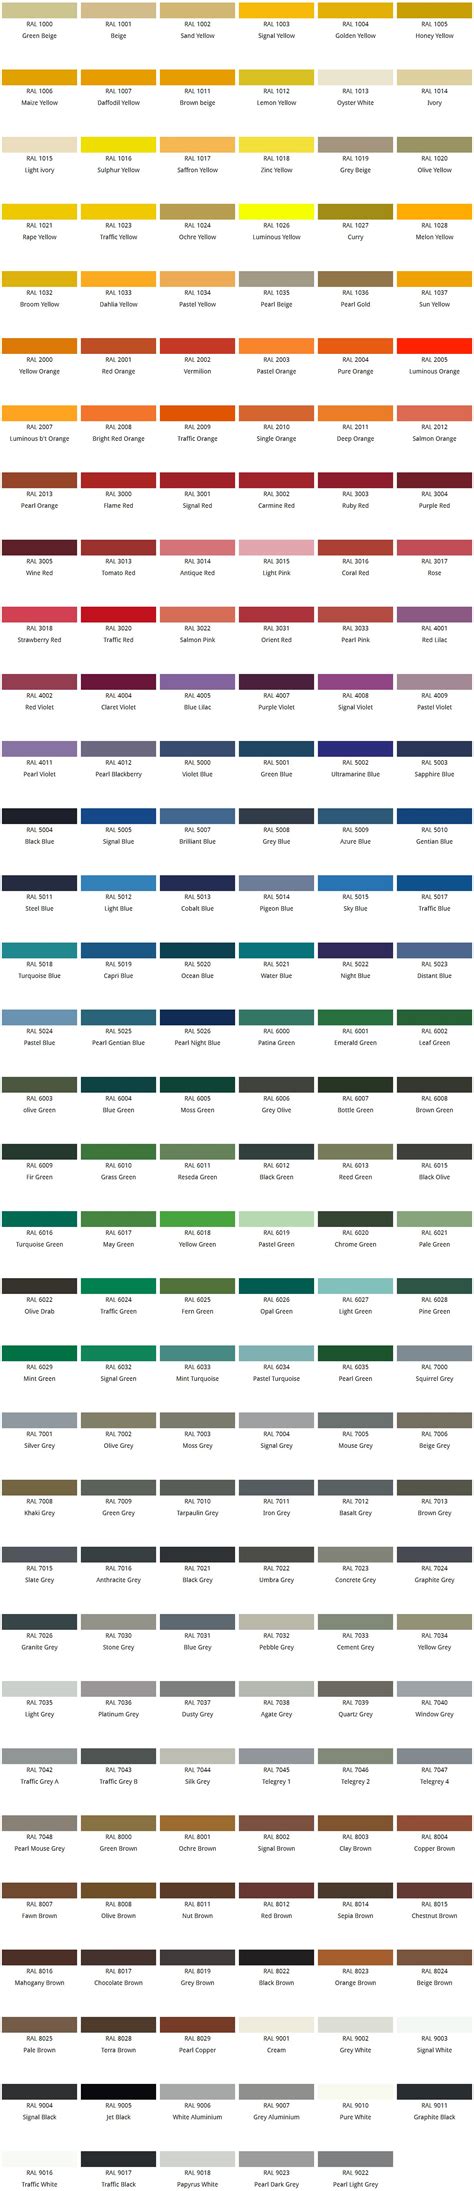 Gallery Of Ral Colour Chart Pdf Unique Ral Color Chart Atlas Protective